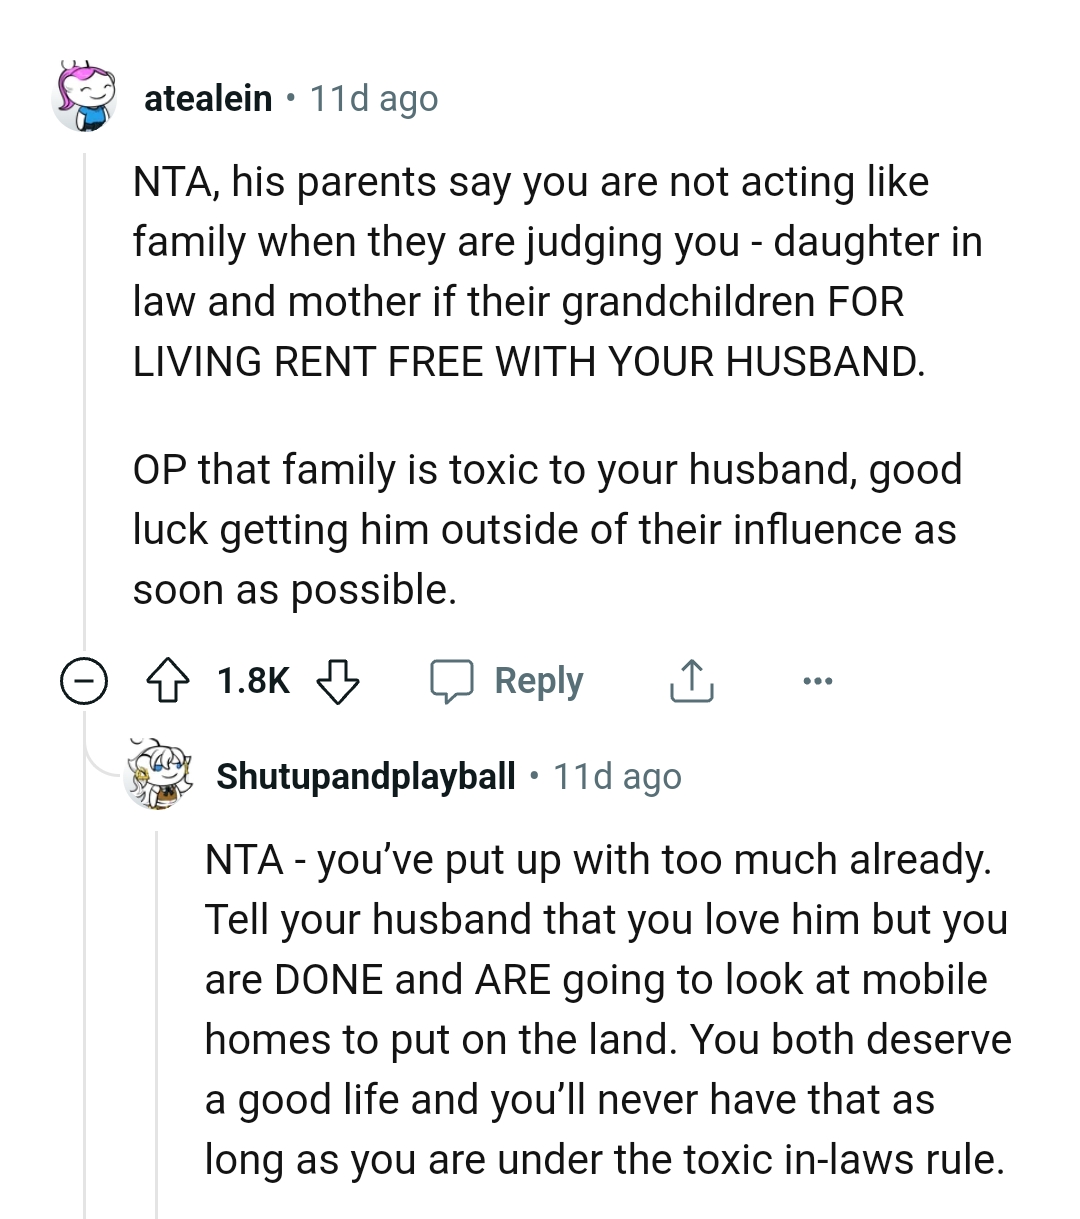 Living rent free with her husband